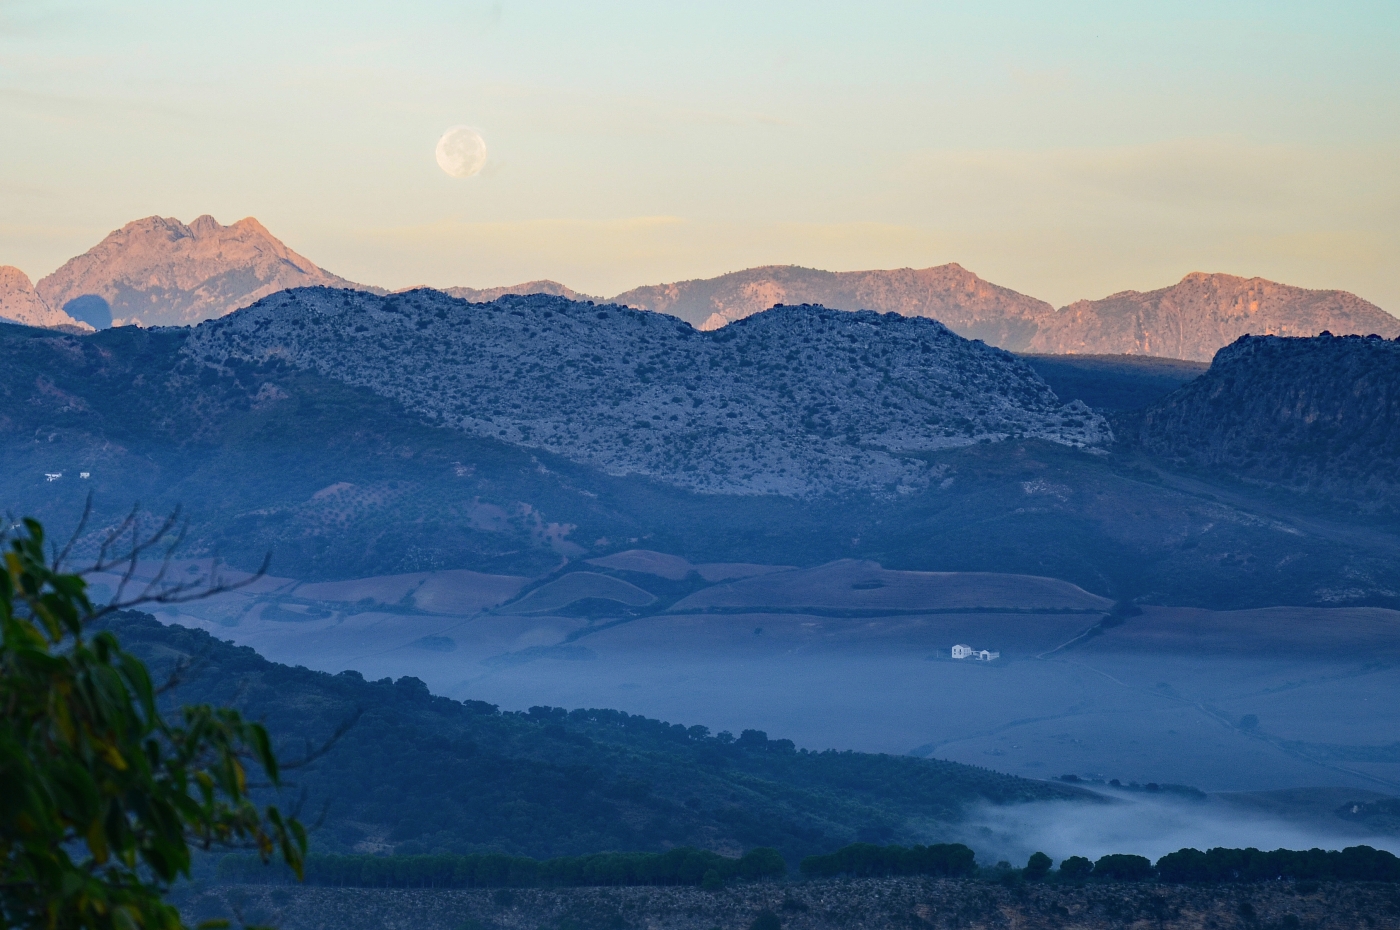 Sunrise And Moon Set Over Spanish Valley by Lou Norton